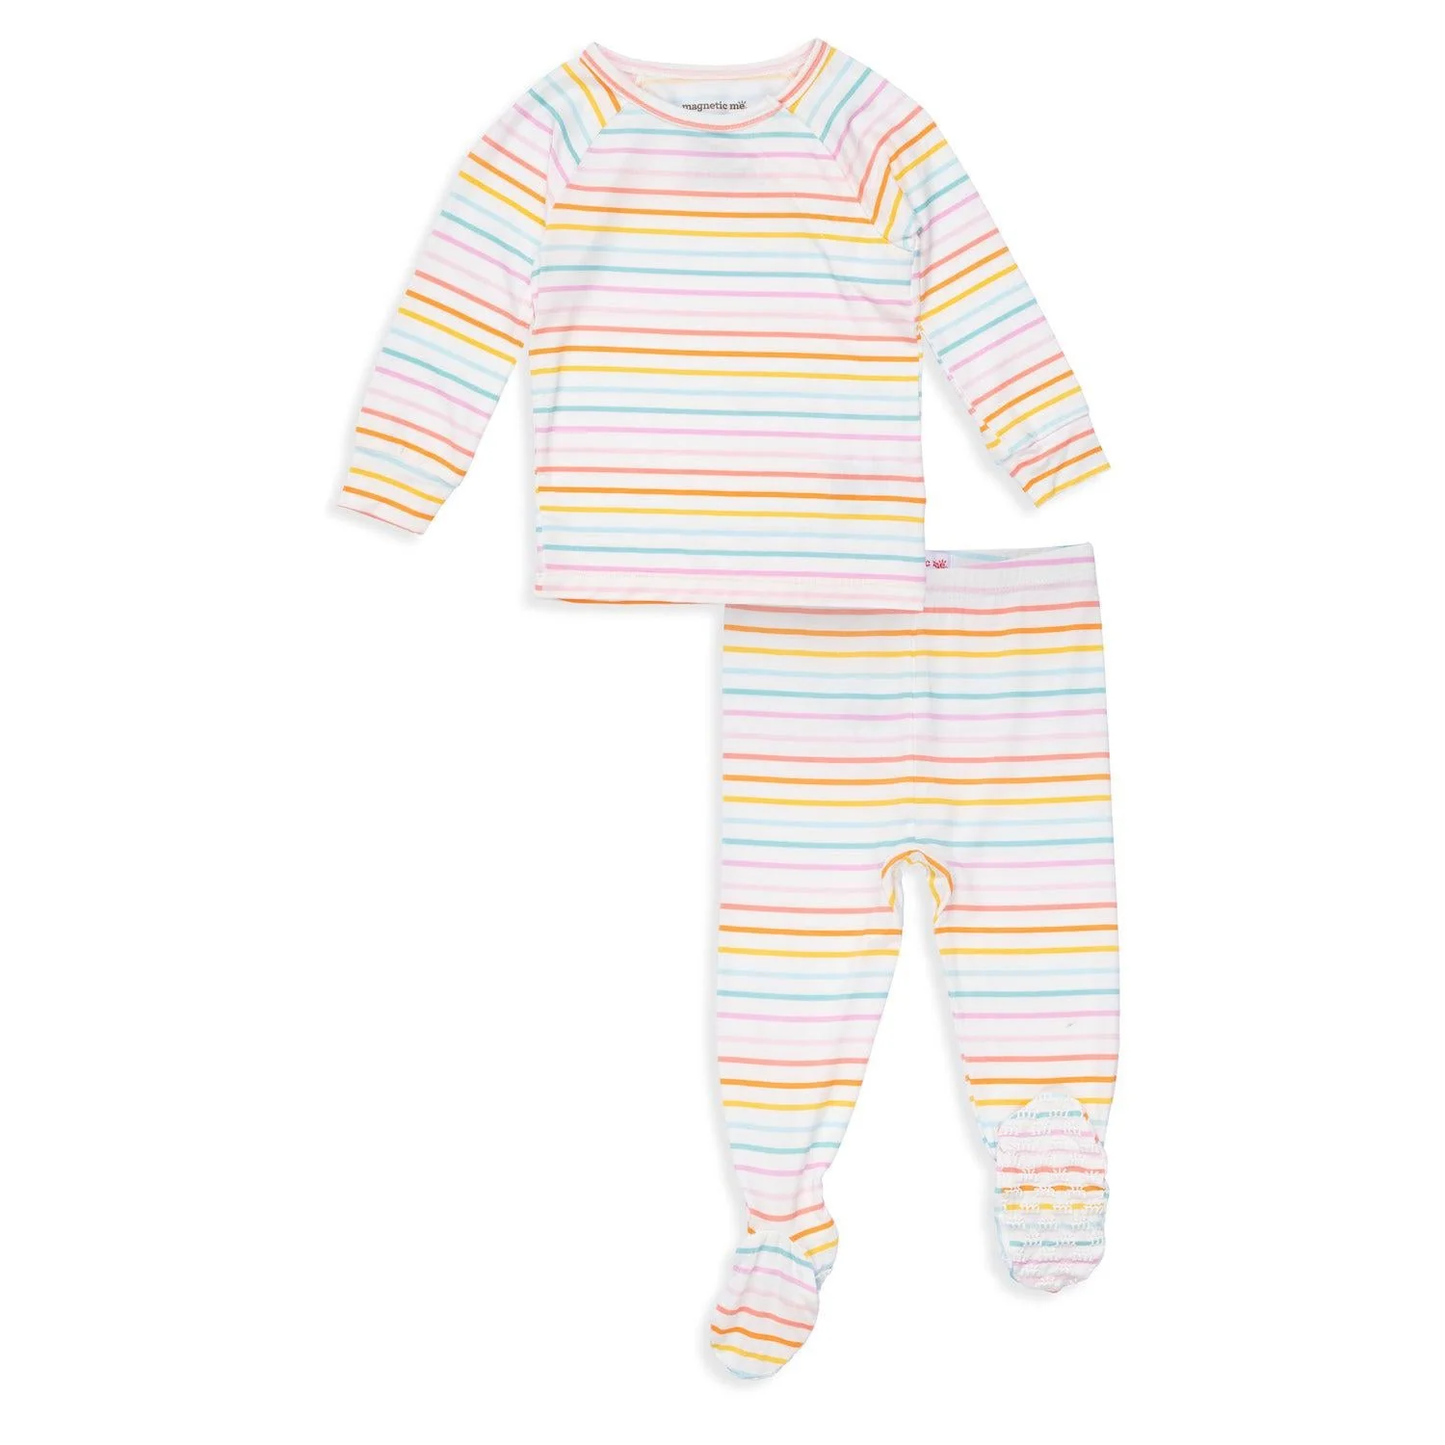 Candy stripe modal magnetic toddler twotie